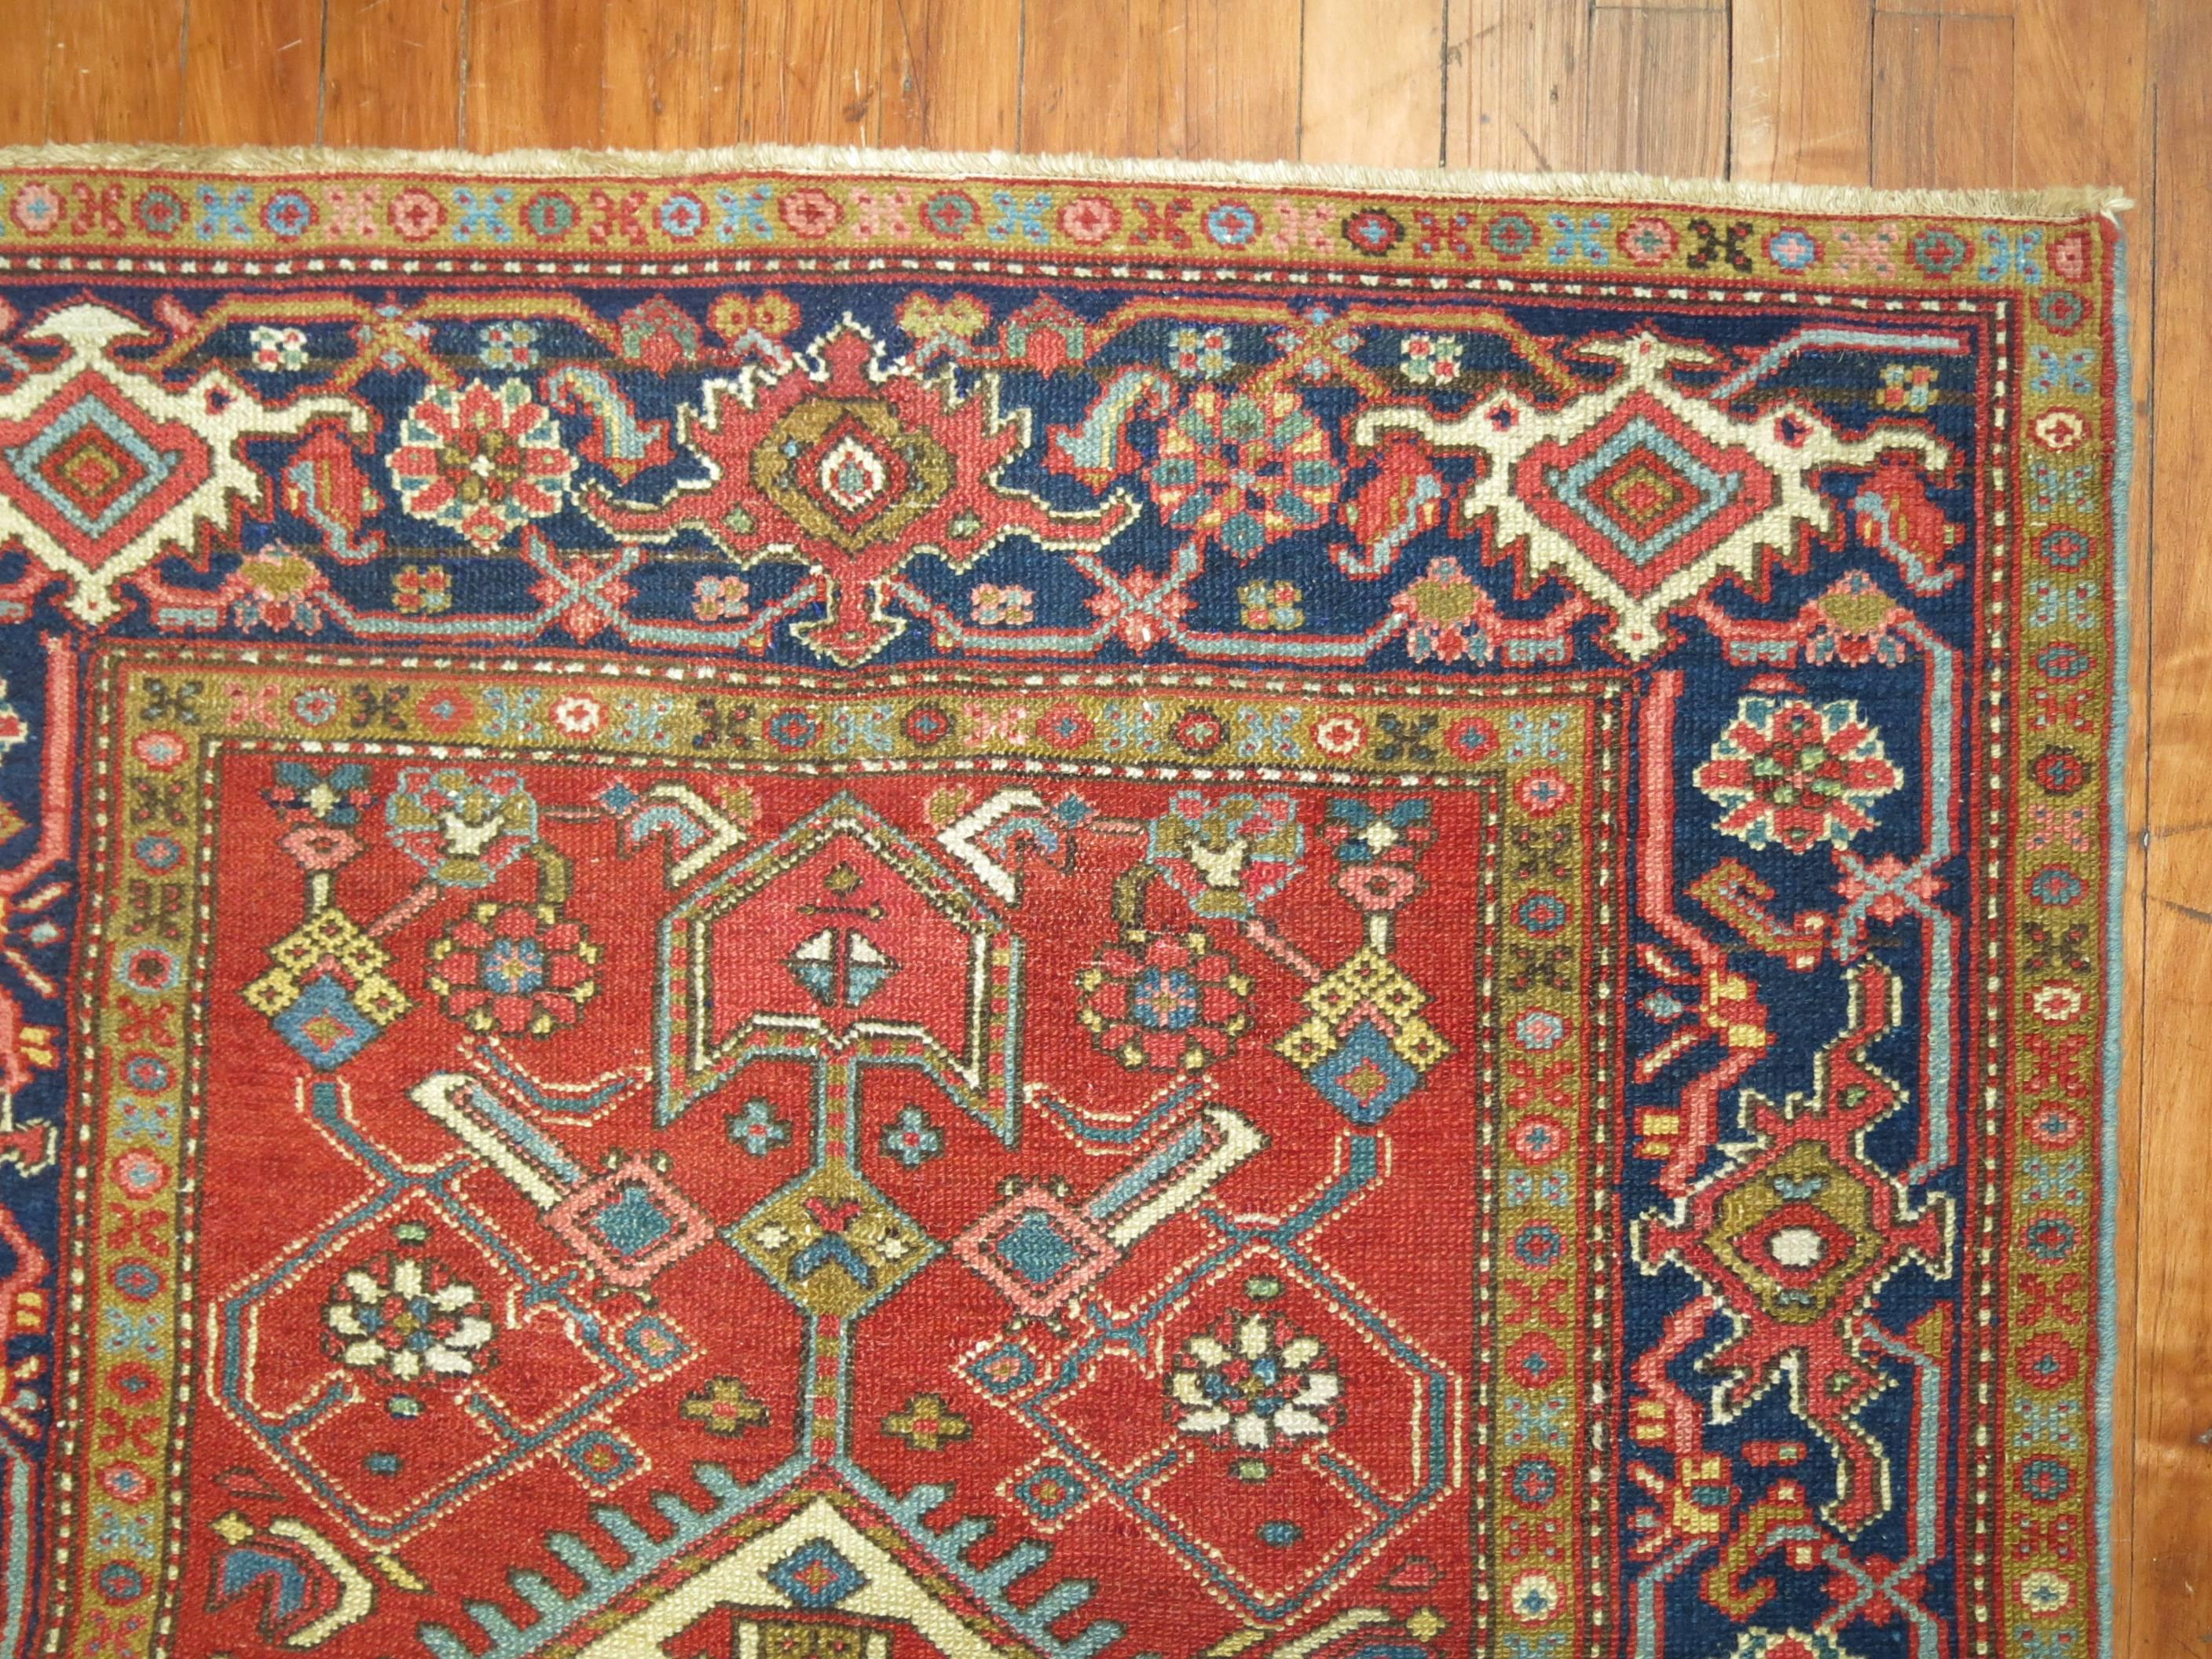 Rich colored antique Persian Serapi runner.

Fine 19th century antique Serapi carpets include some of the most rare and desirable runner size decorative Persian carpets. Woven in the rugged mountains of Northwest Persia, Serapi rugs are a distinct